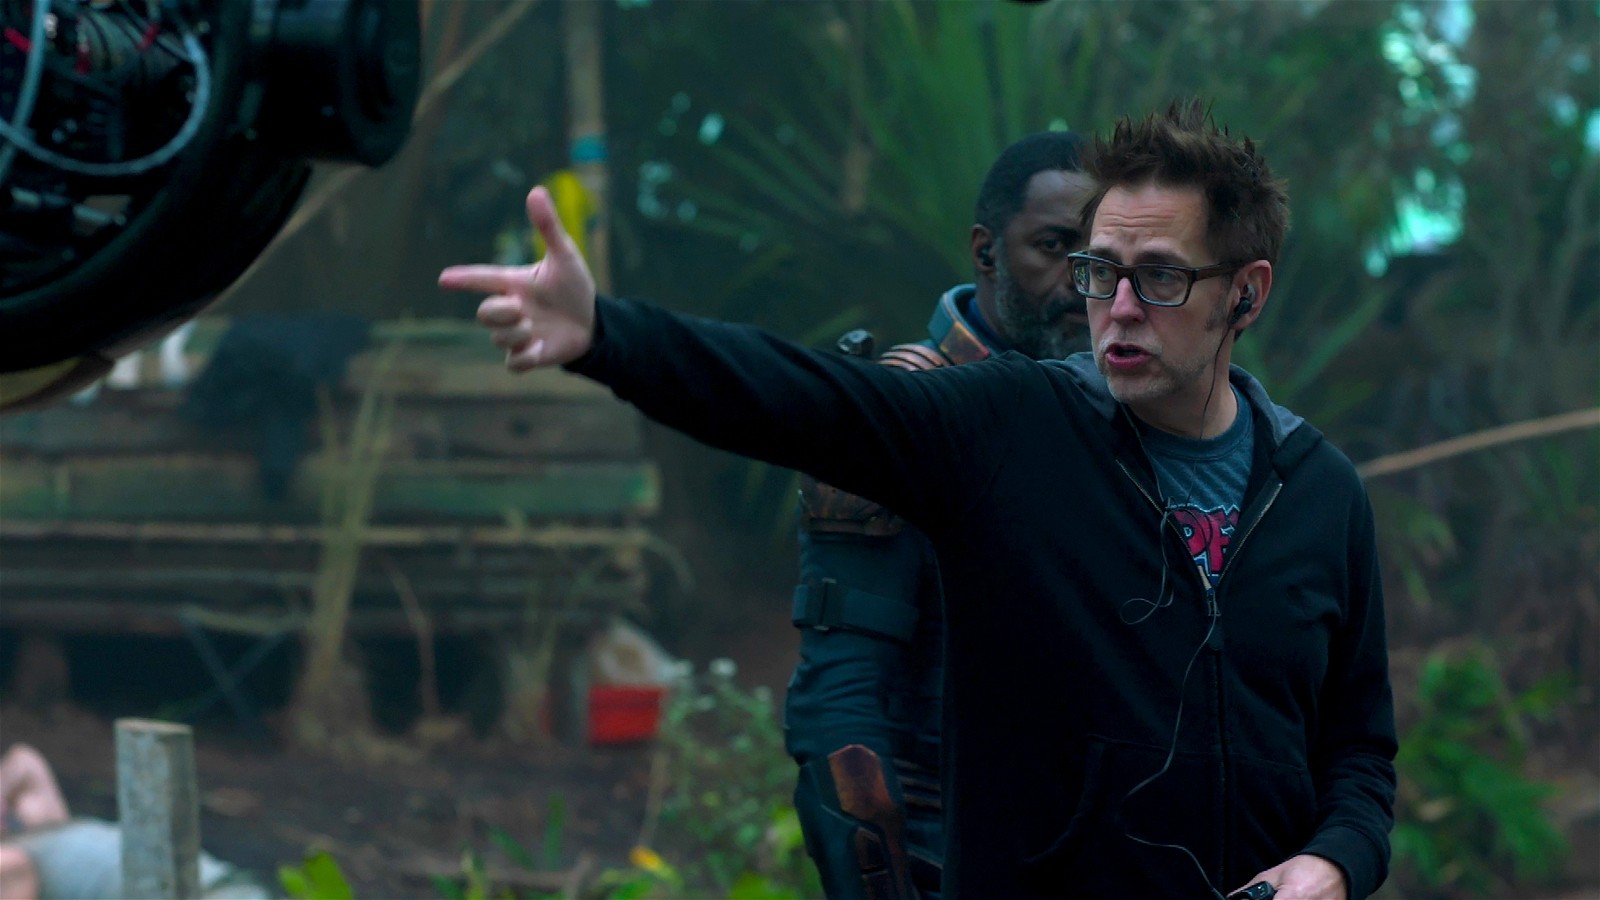 James Gunn on the sets of The Suicide Squad | Credits: Warner Bros.